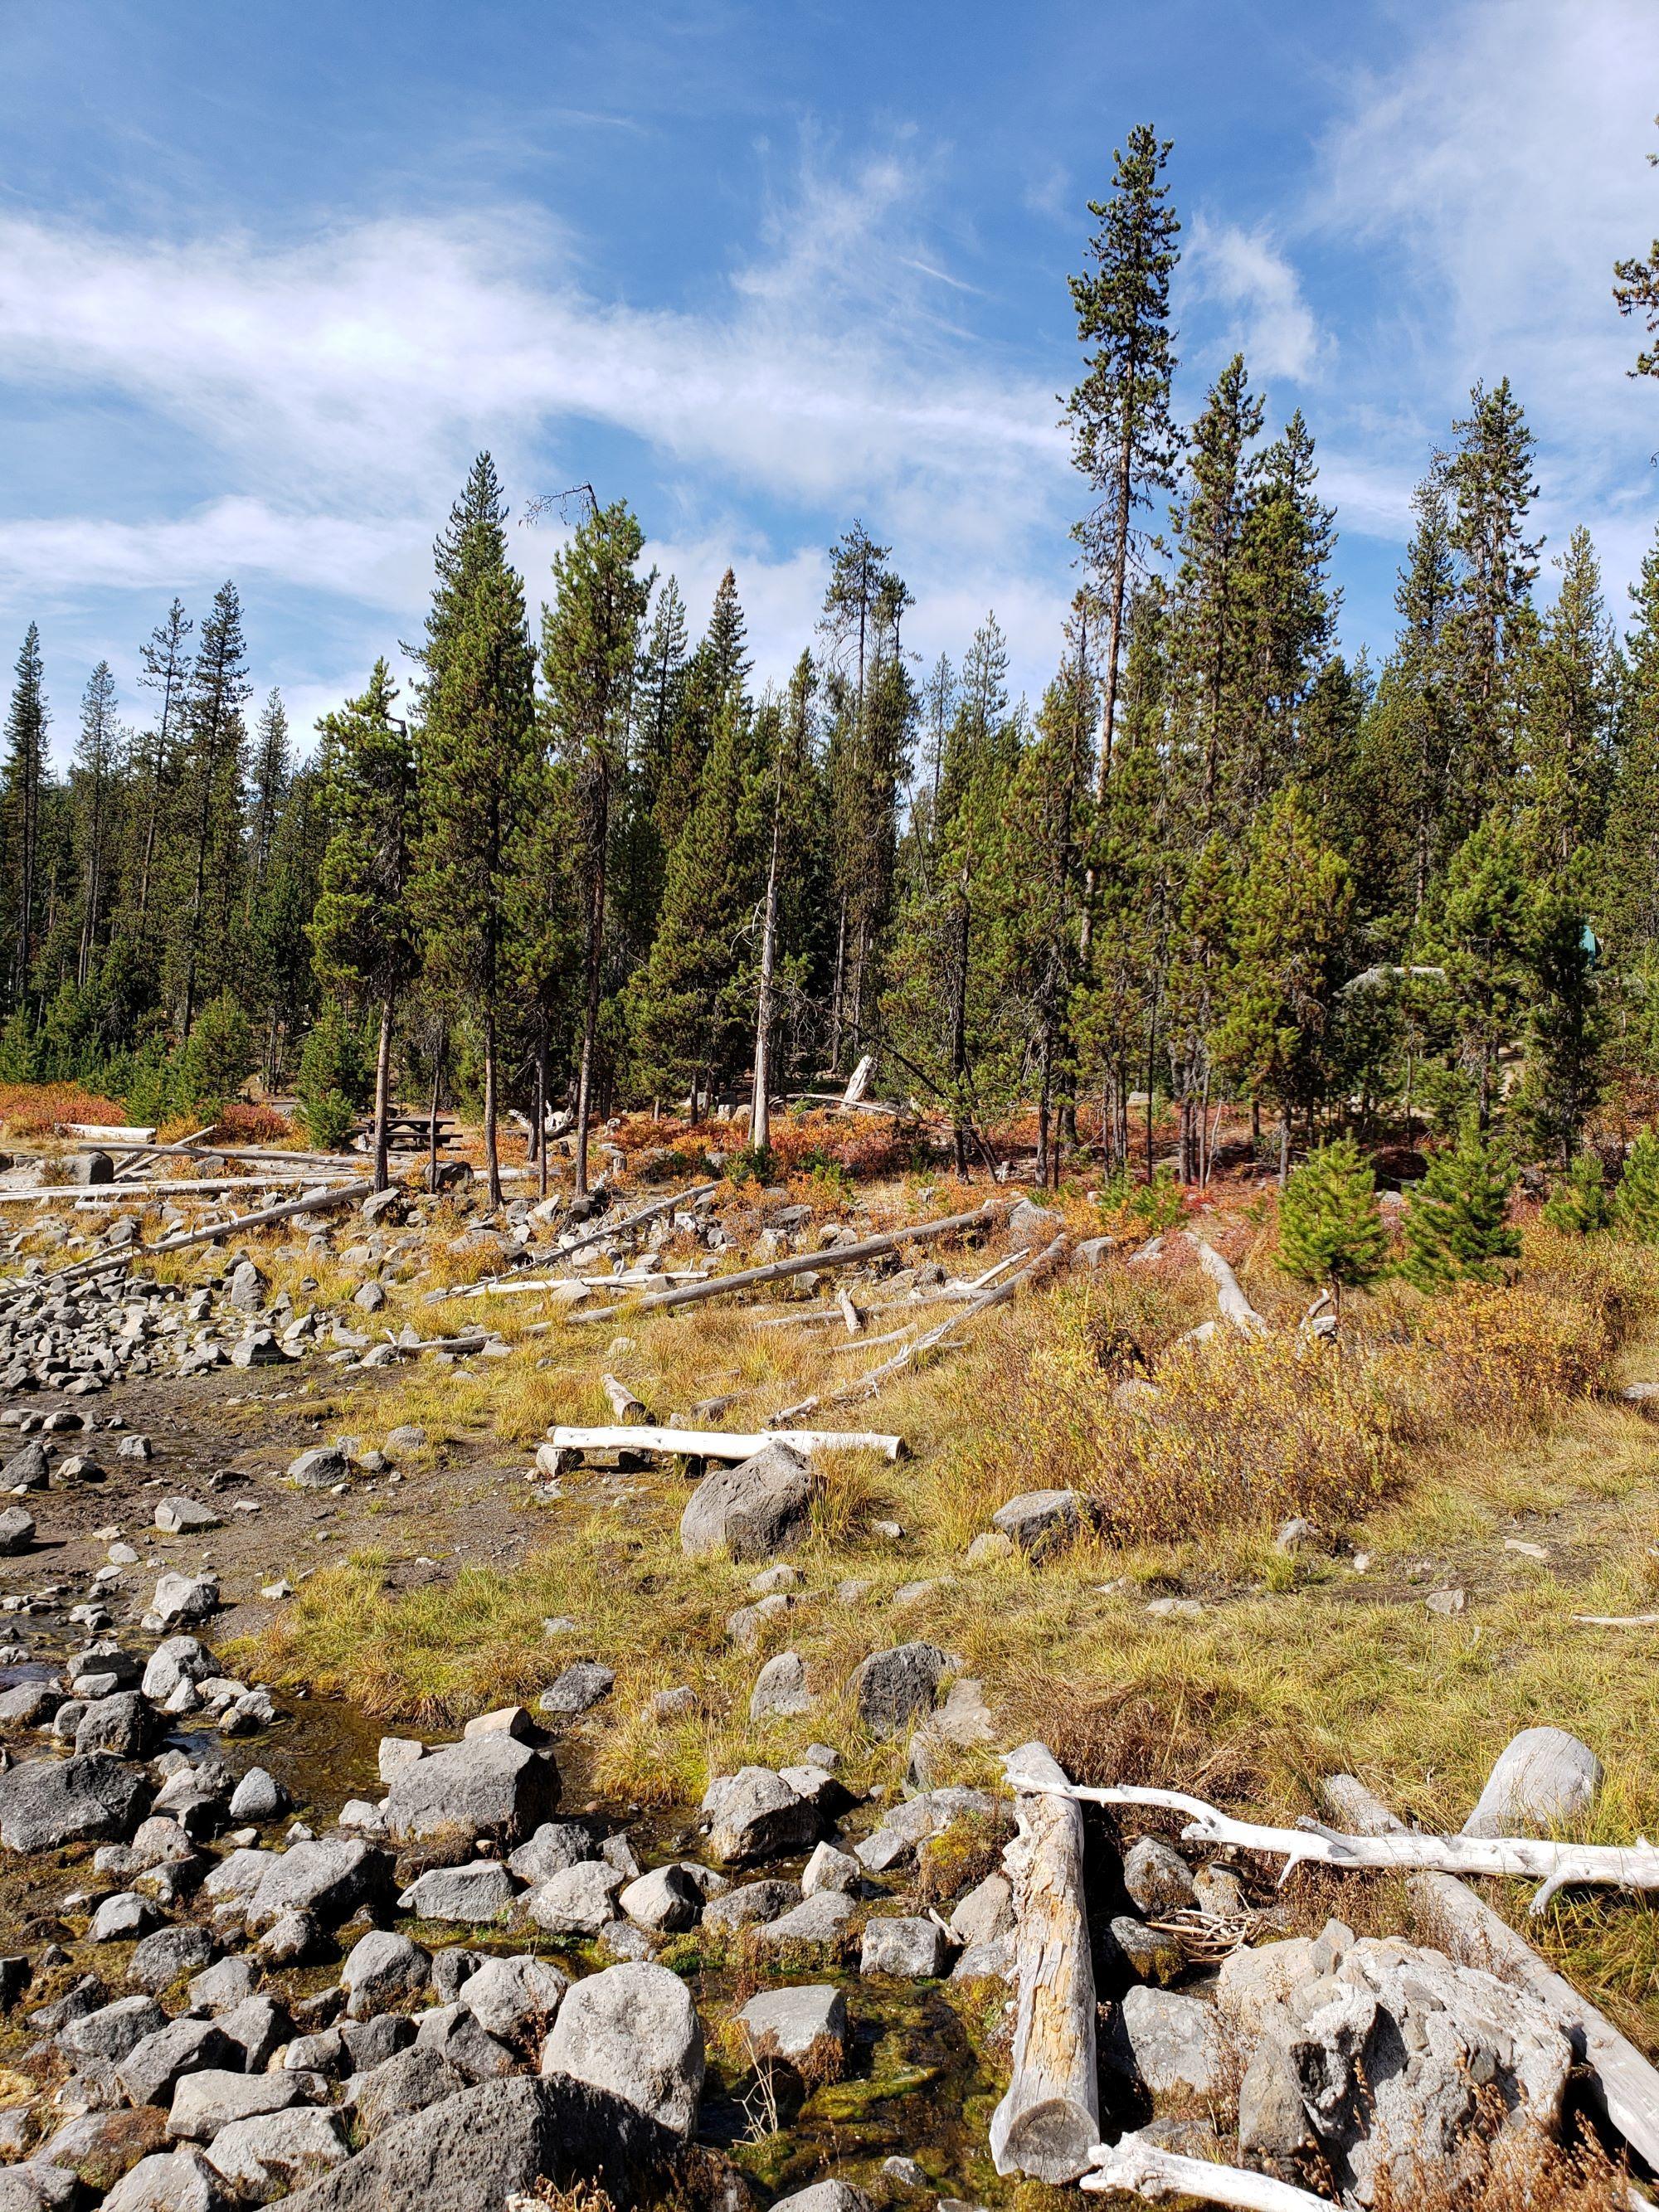 An image of trees and dead tree trunks on the ground in the Deschutes National Forest by Elk Lake.